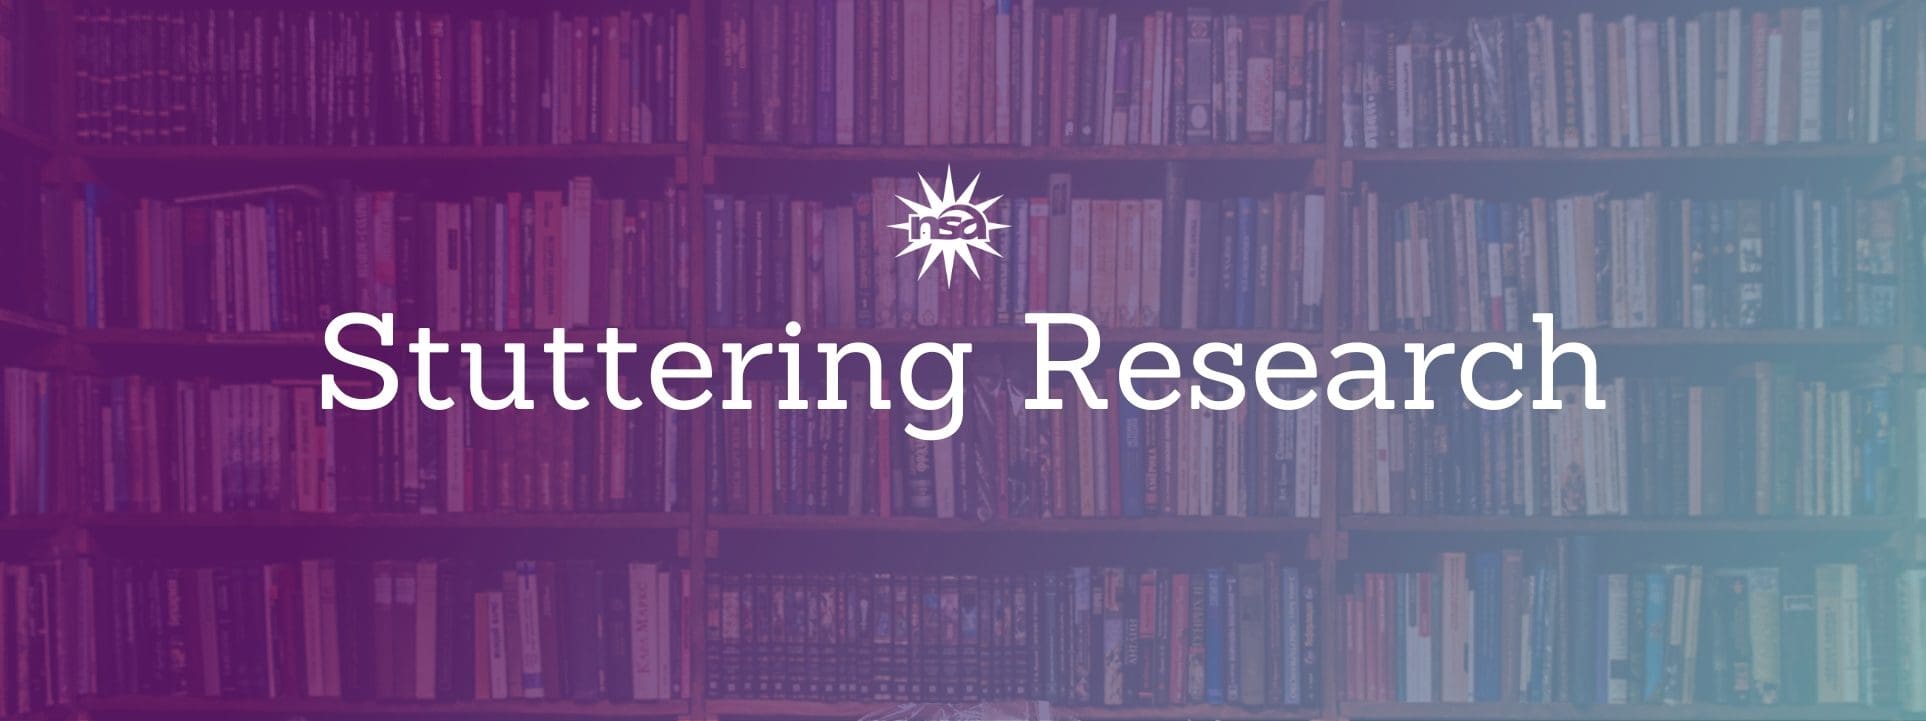 stuttering research banner